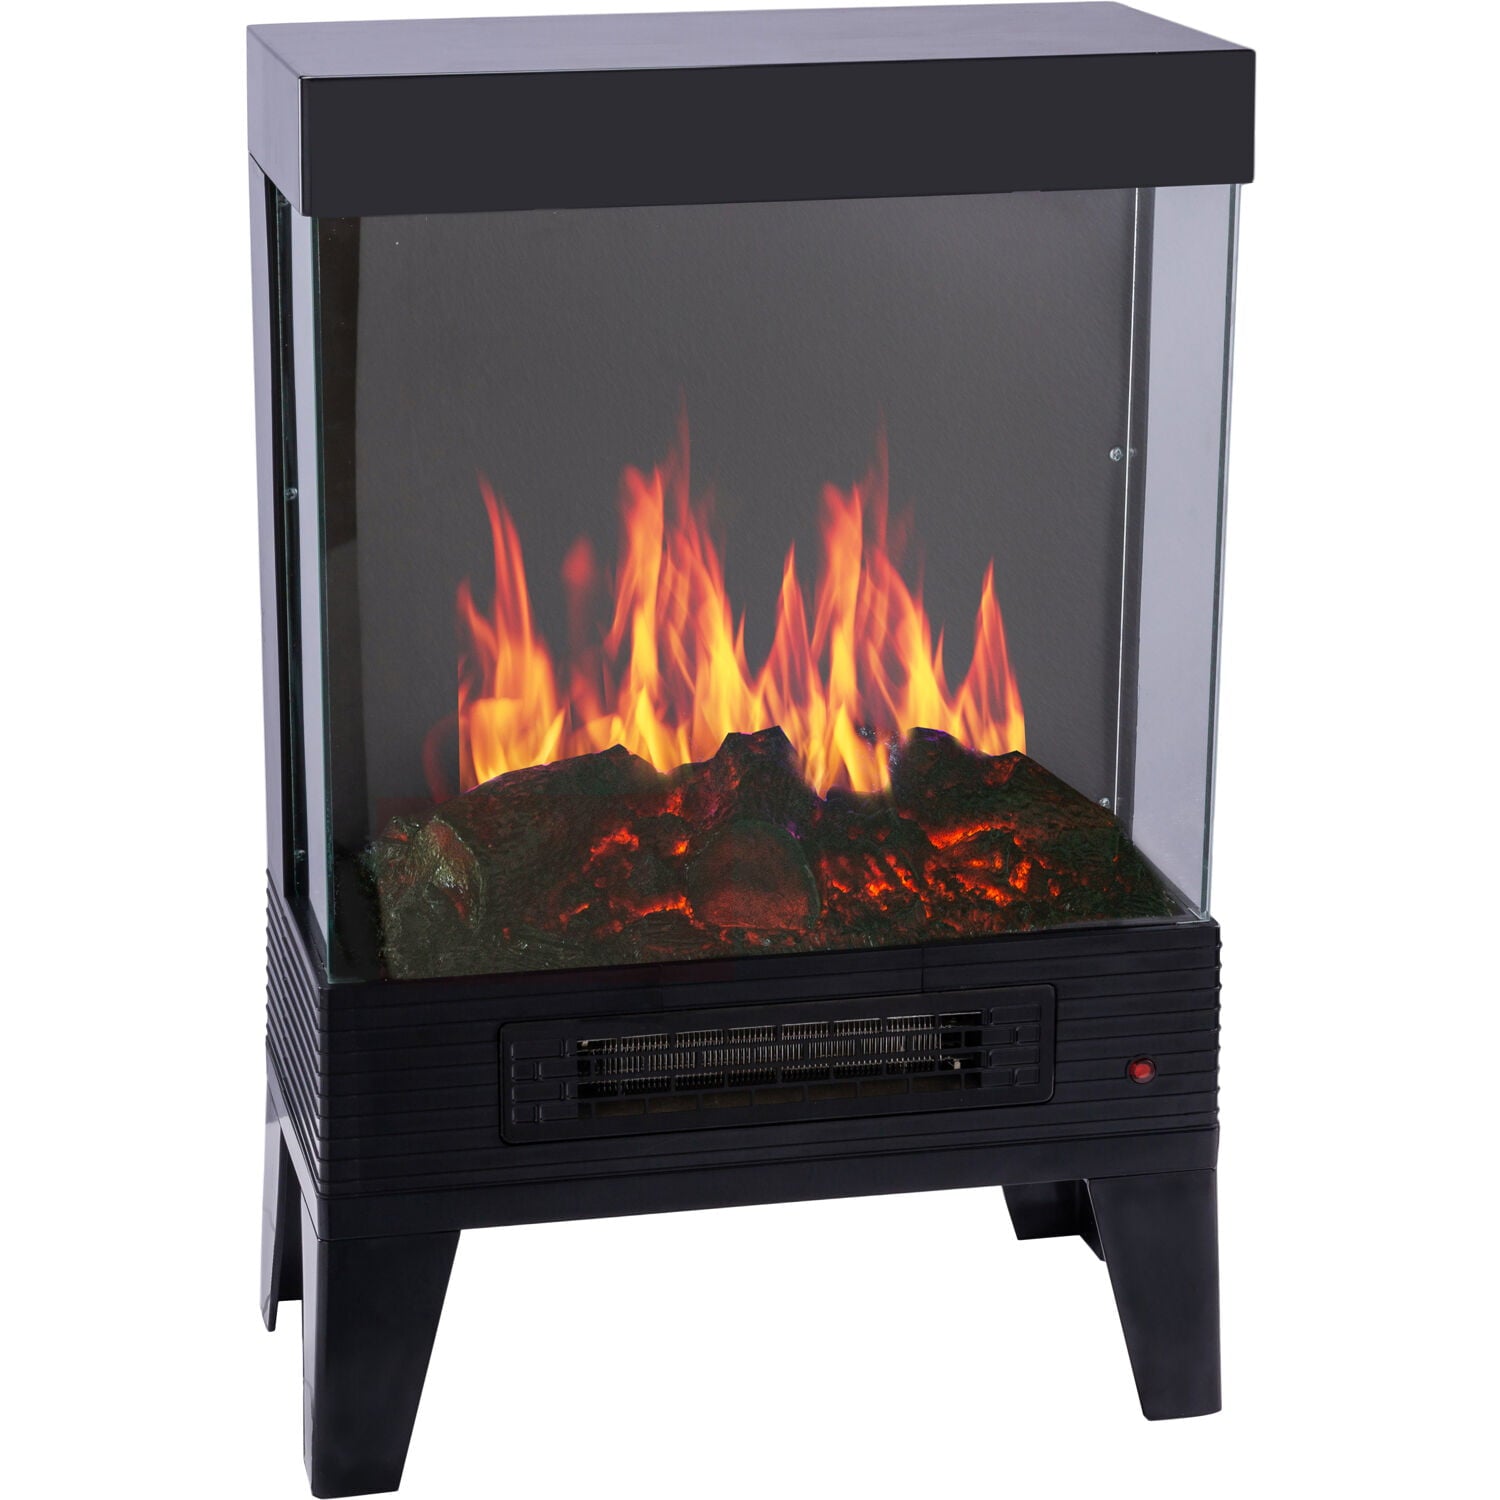 LifeSmart Contemporary Heater Stove with 3-Sided Flame View